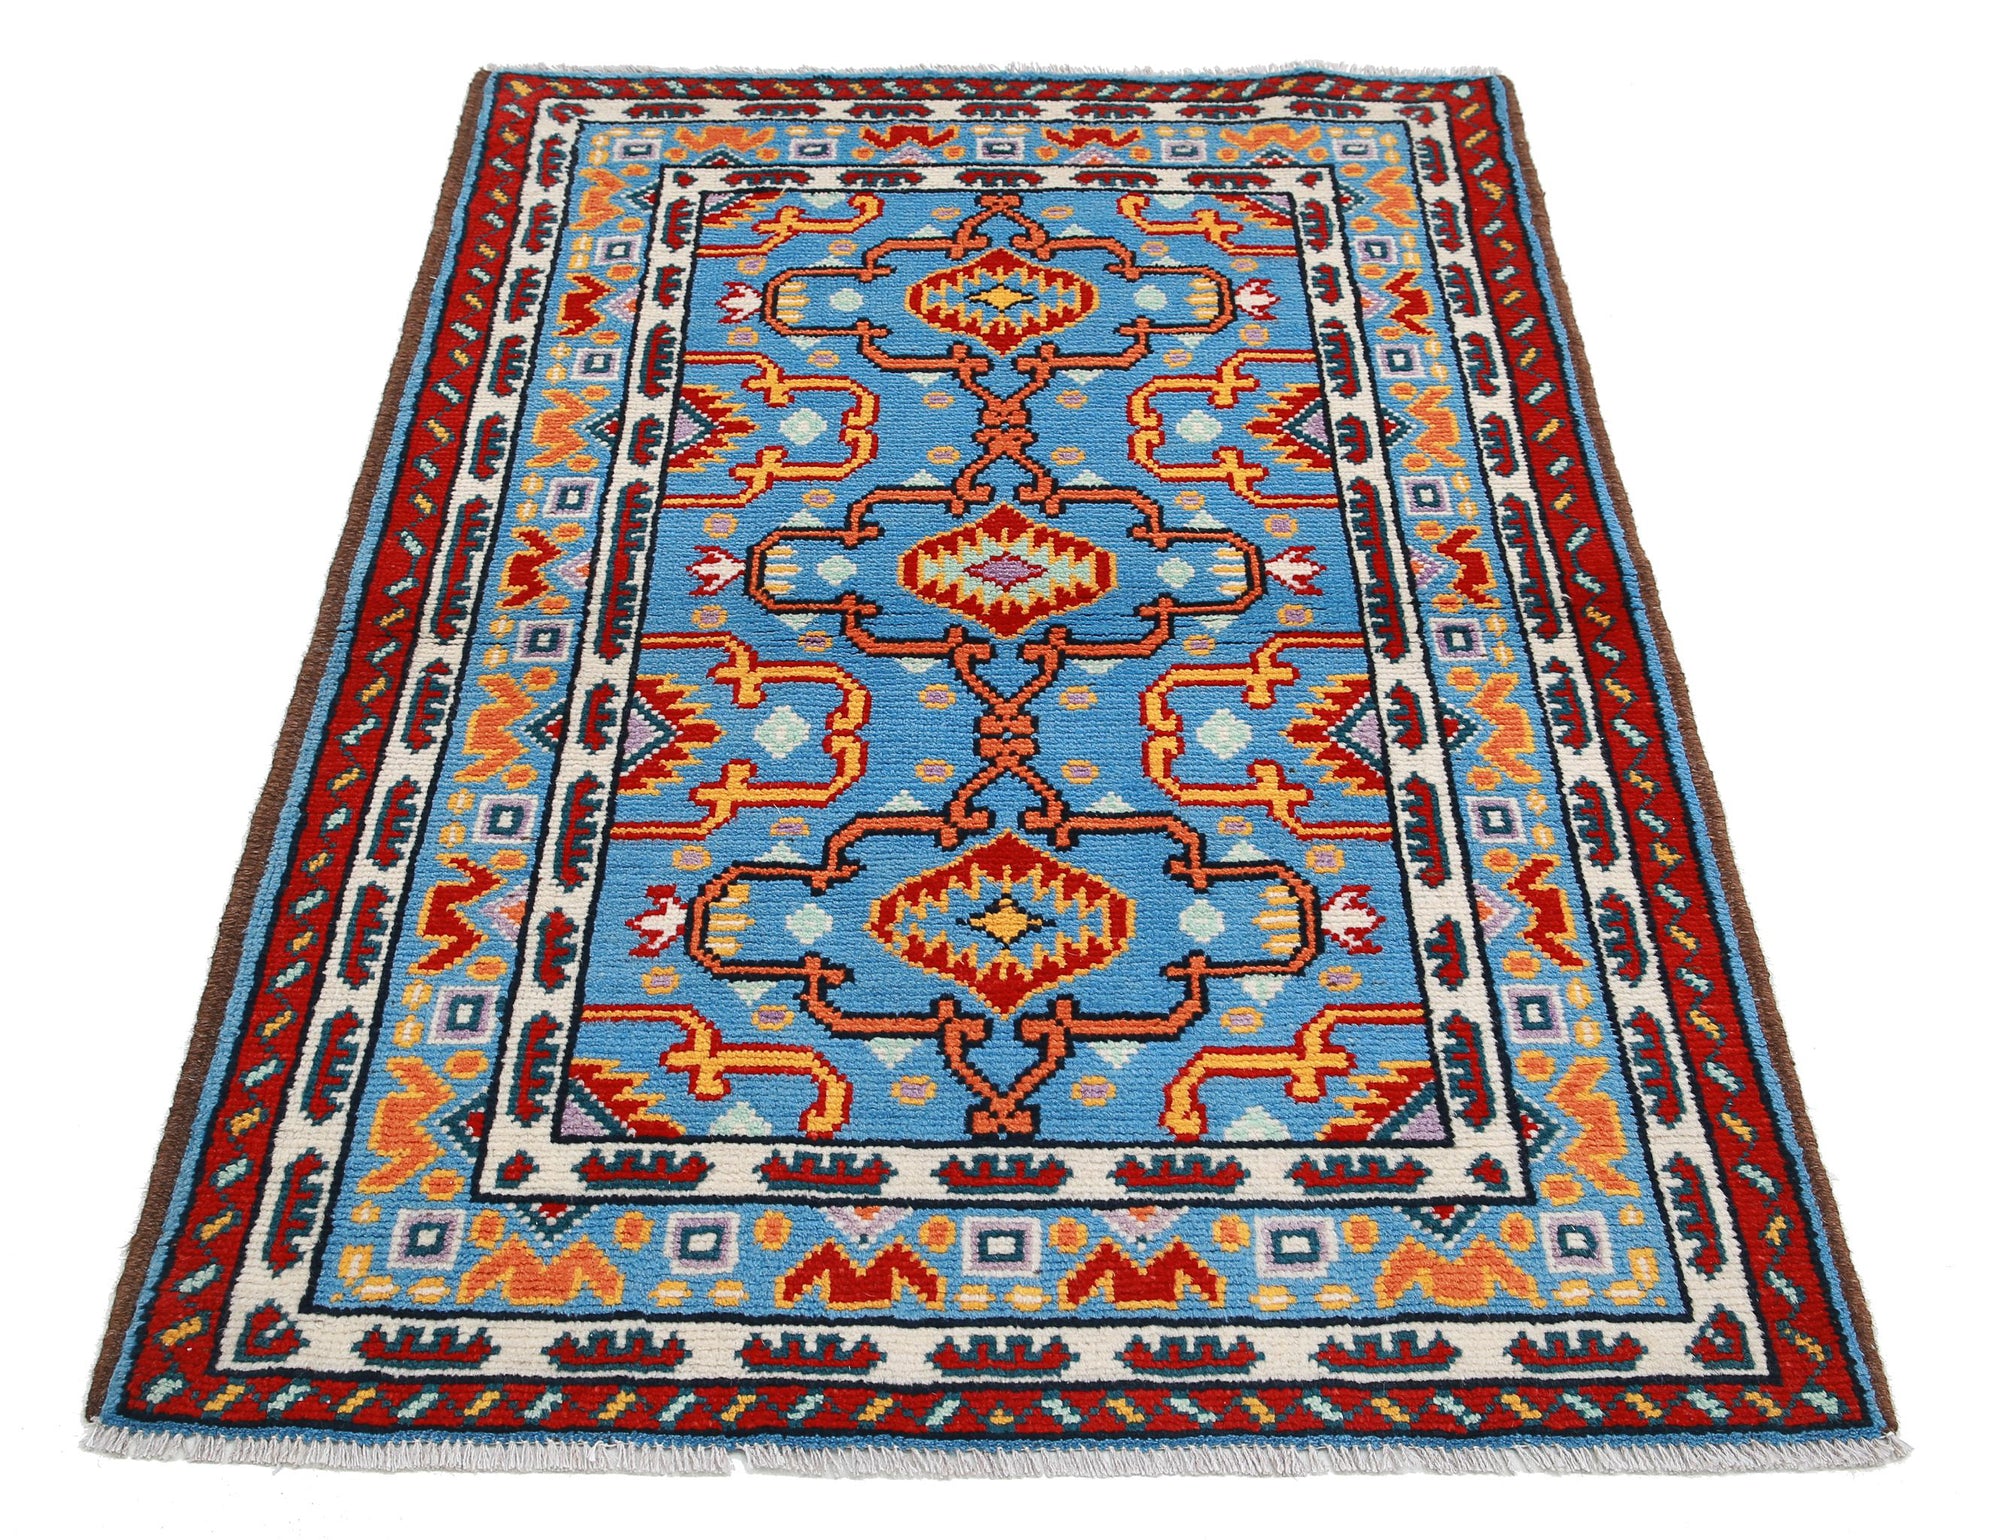 Revival-hand-knotted-qarghani-wool-rug-5014208-3.jpg